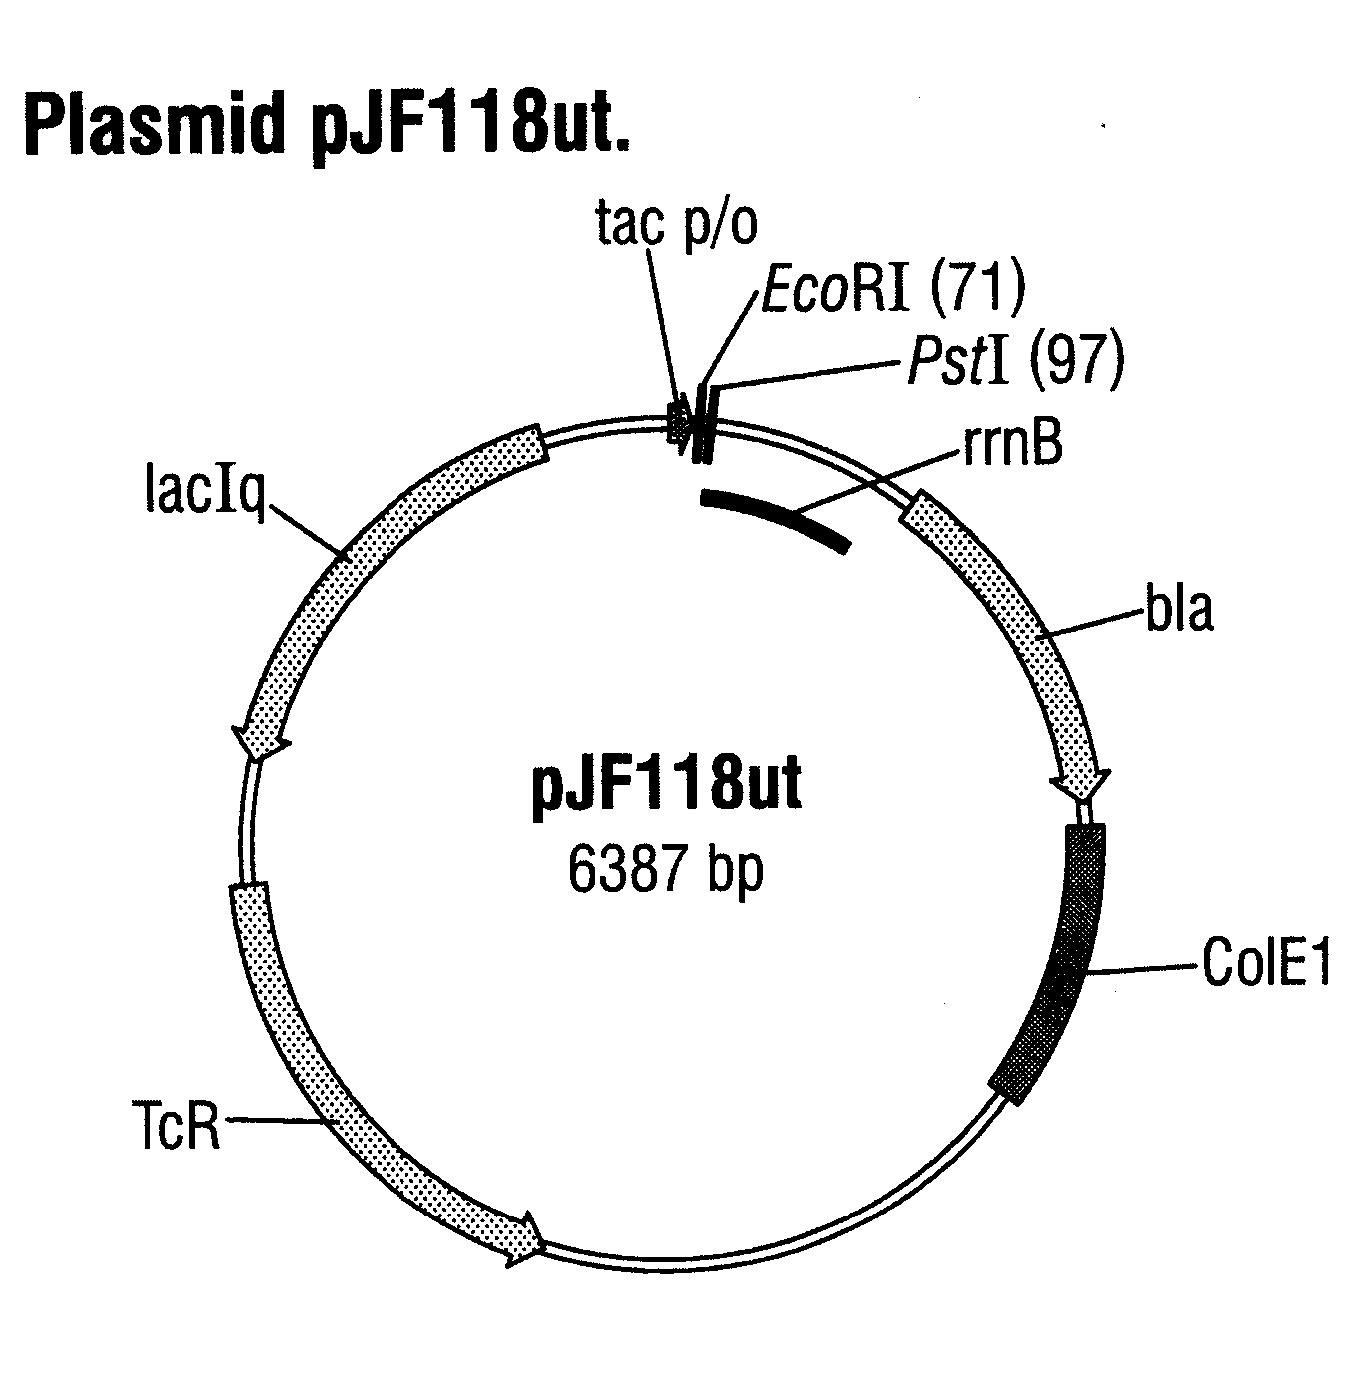 Signal peptide for the production of recombinant proteins